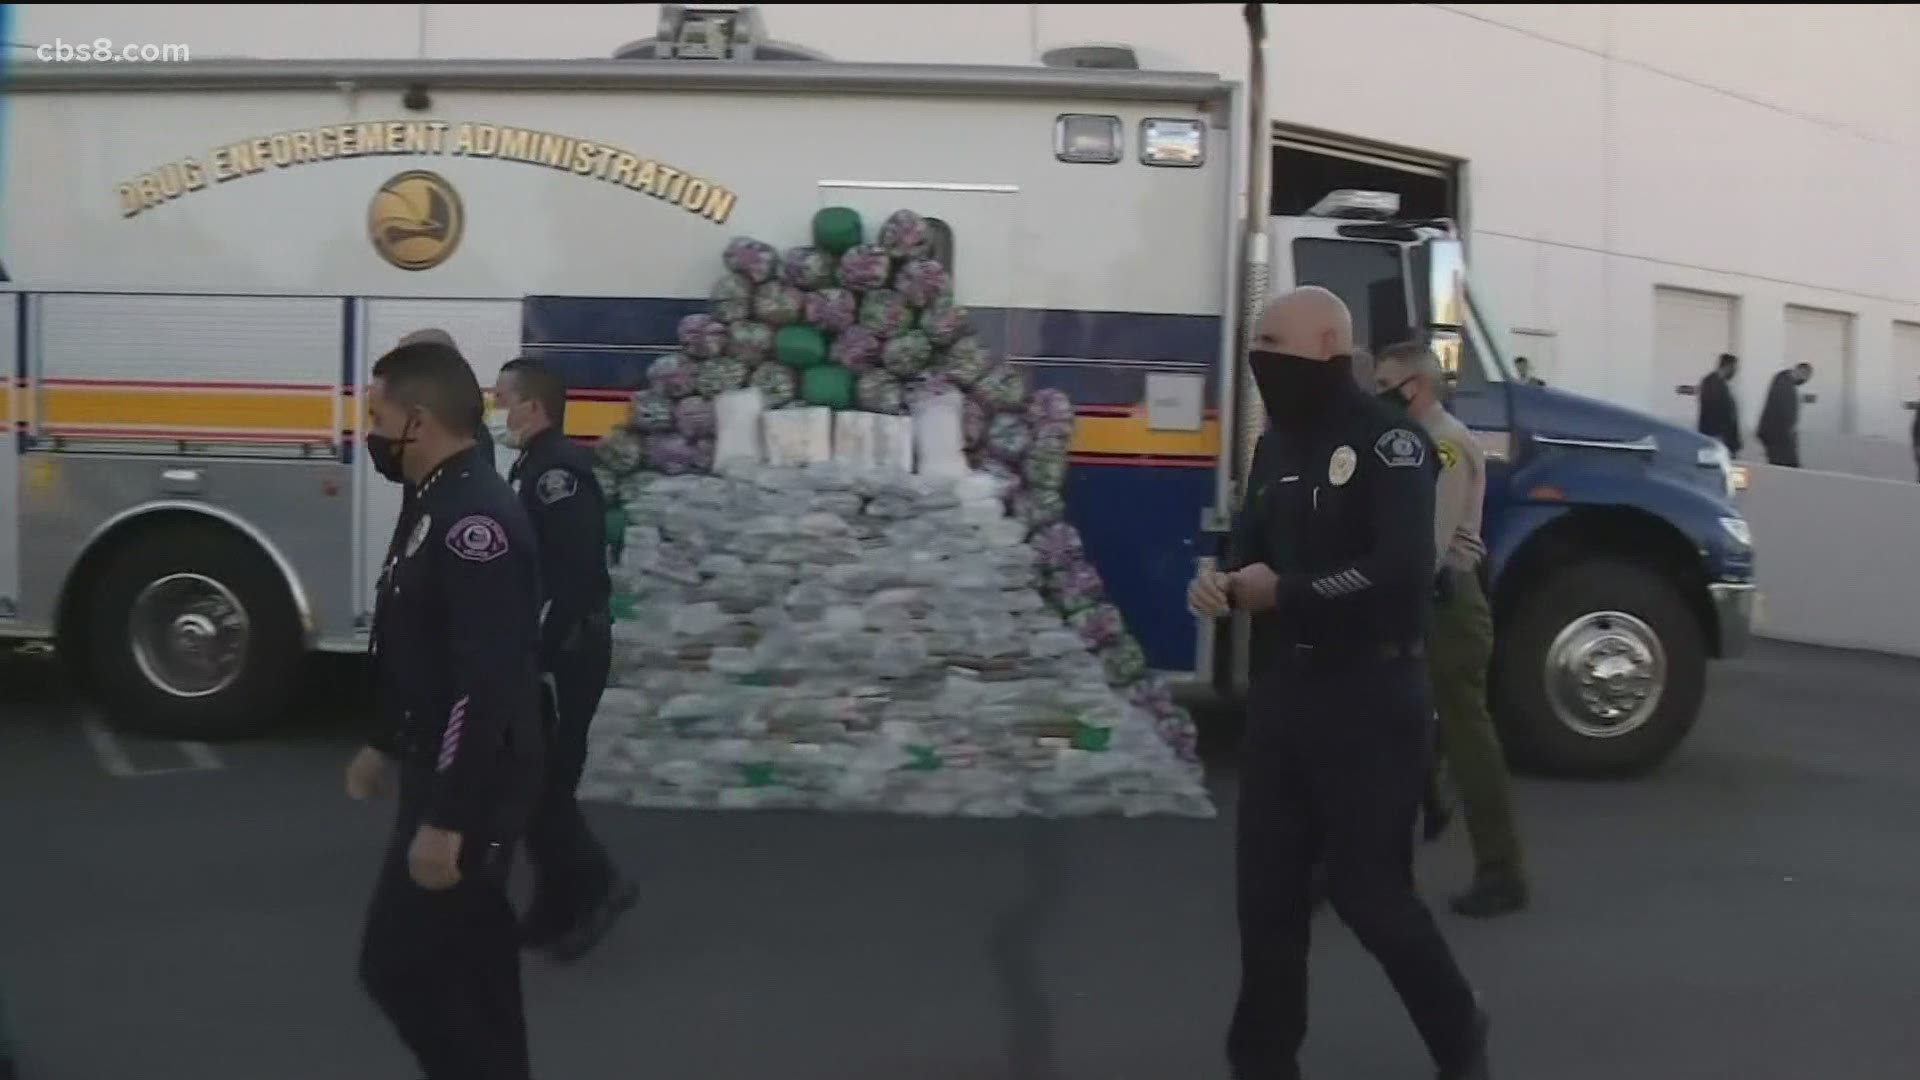 Federal agents displayed a 10-foot high pile of the confiscated drug representing a haul of more than 2,200 pounds seized at stash houses in Riverside County.